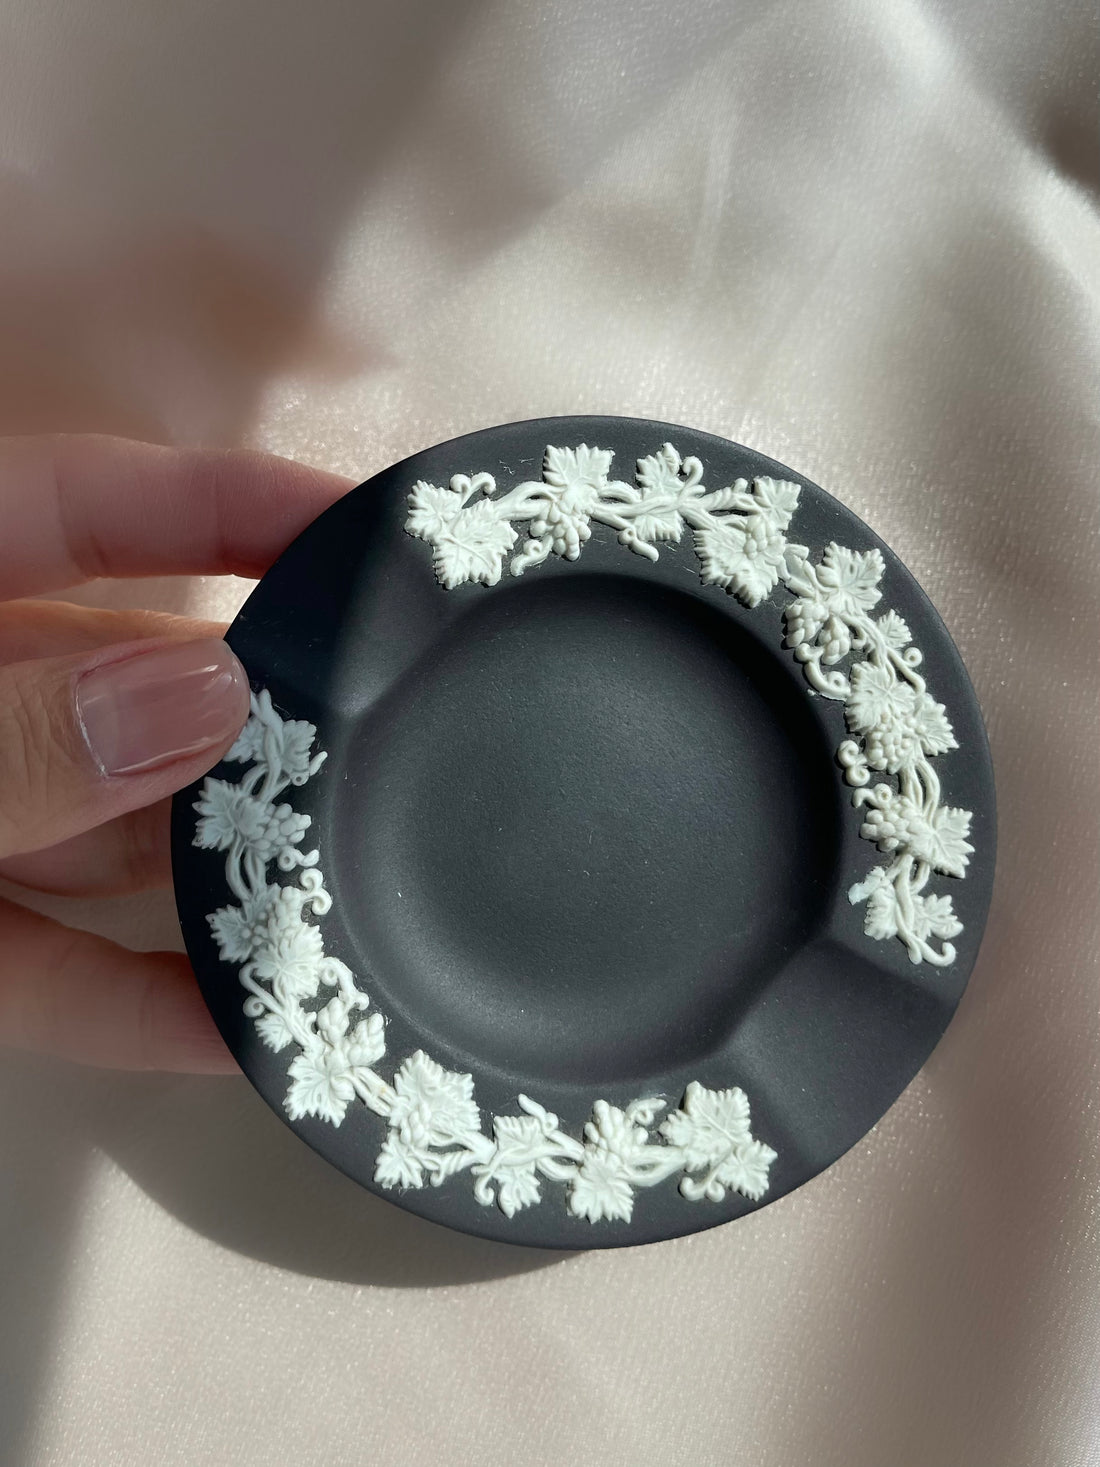 Vintage Black-and-White Wedgwood Made in England Porcelain Ashtray, Perfect as a Jewelry Dish